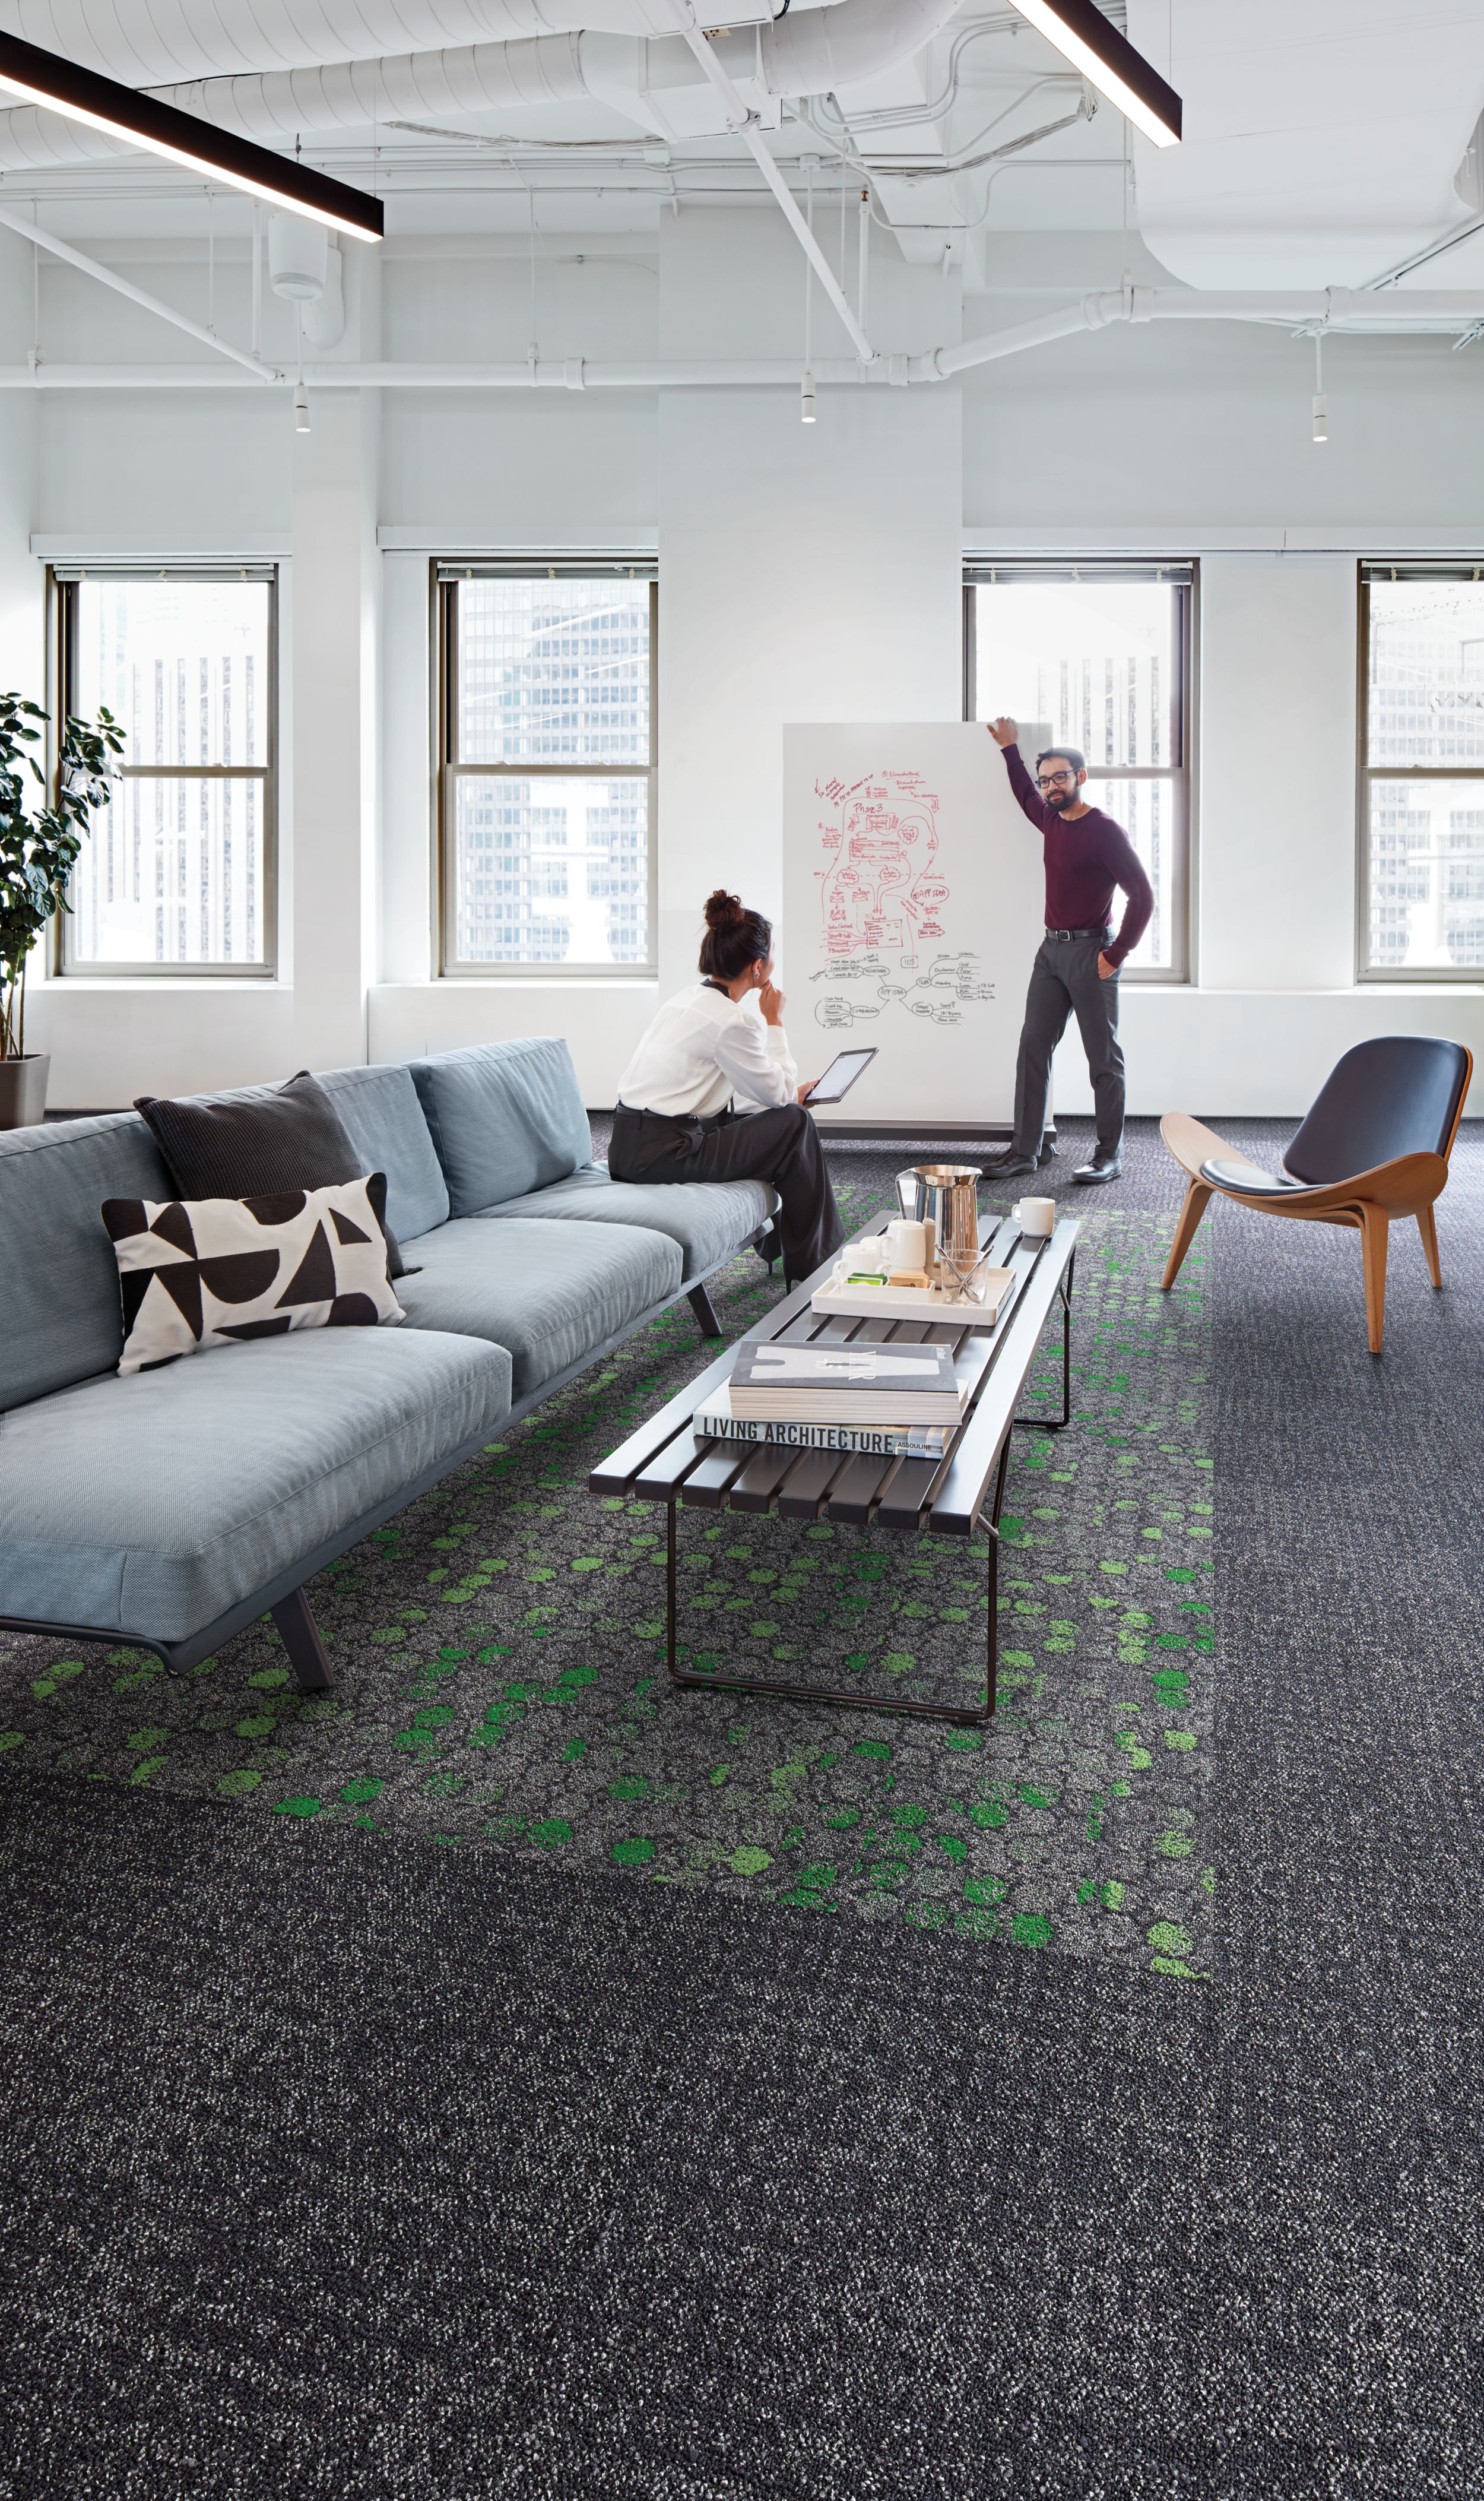 image Interface Broome Street and Wheler Street in open office area with people numéro 5